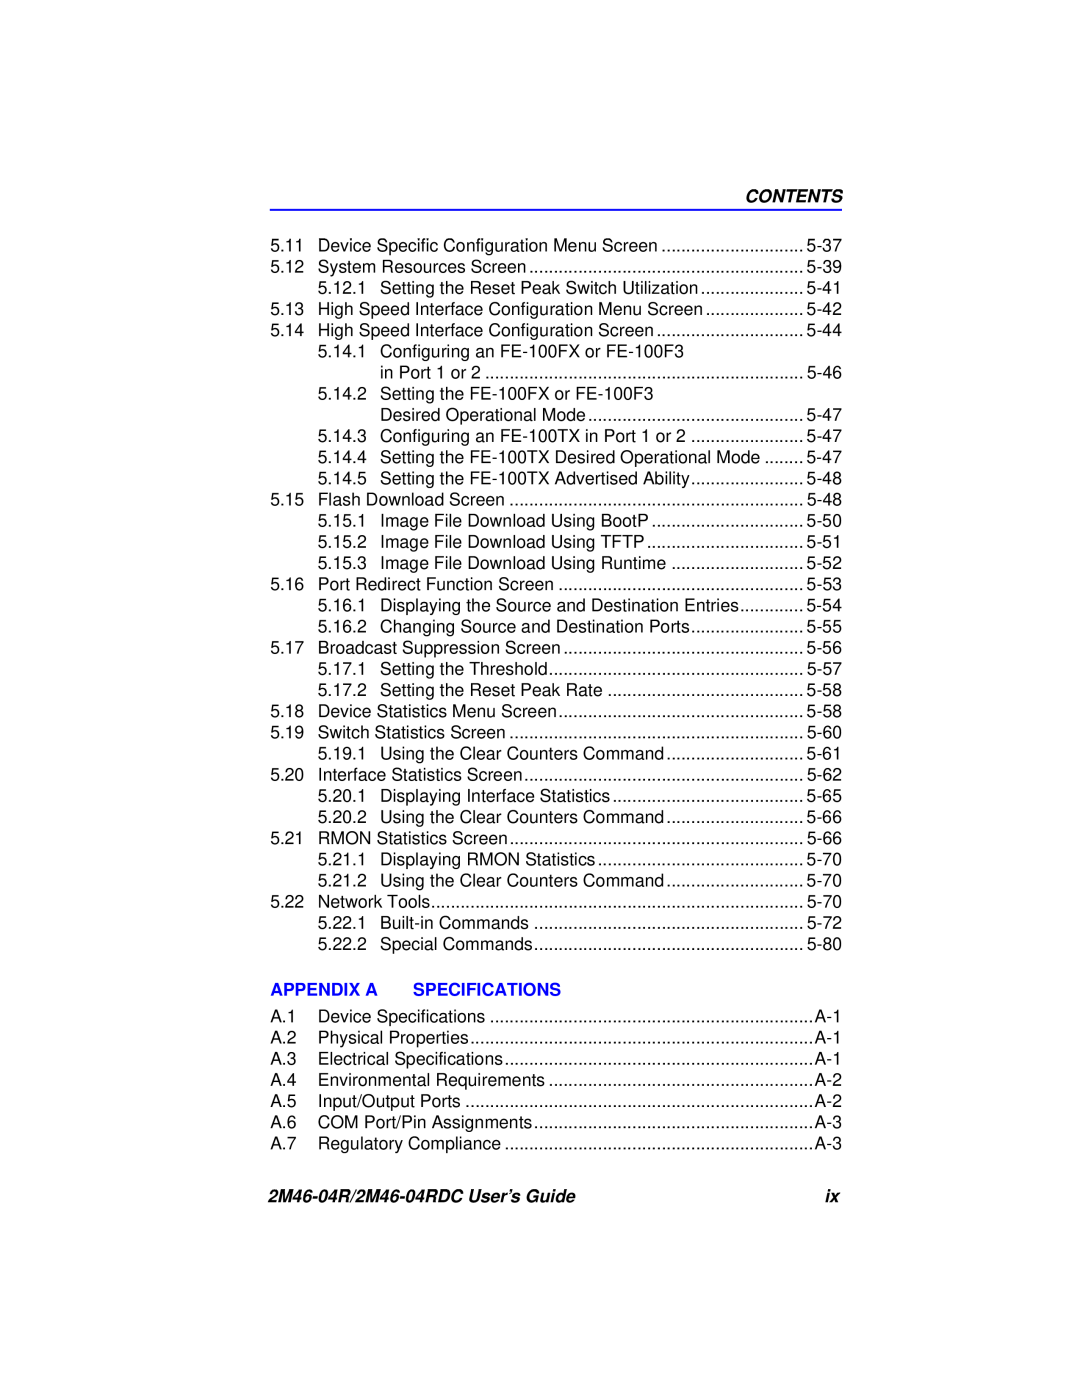 Cabletron Systems pmn manual Contents, Appendix A, Specifications, 2M46-04R/2M46-04RDC User’s Guide 